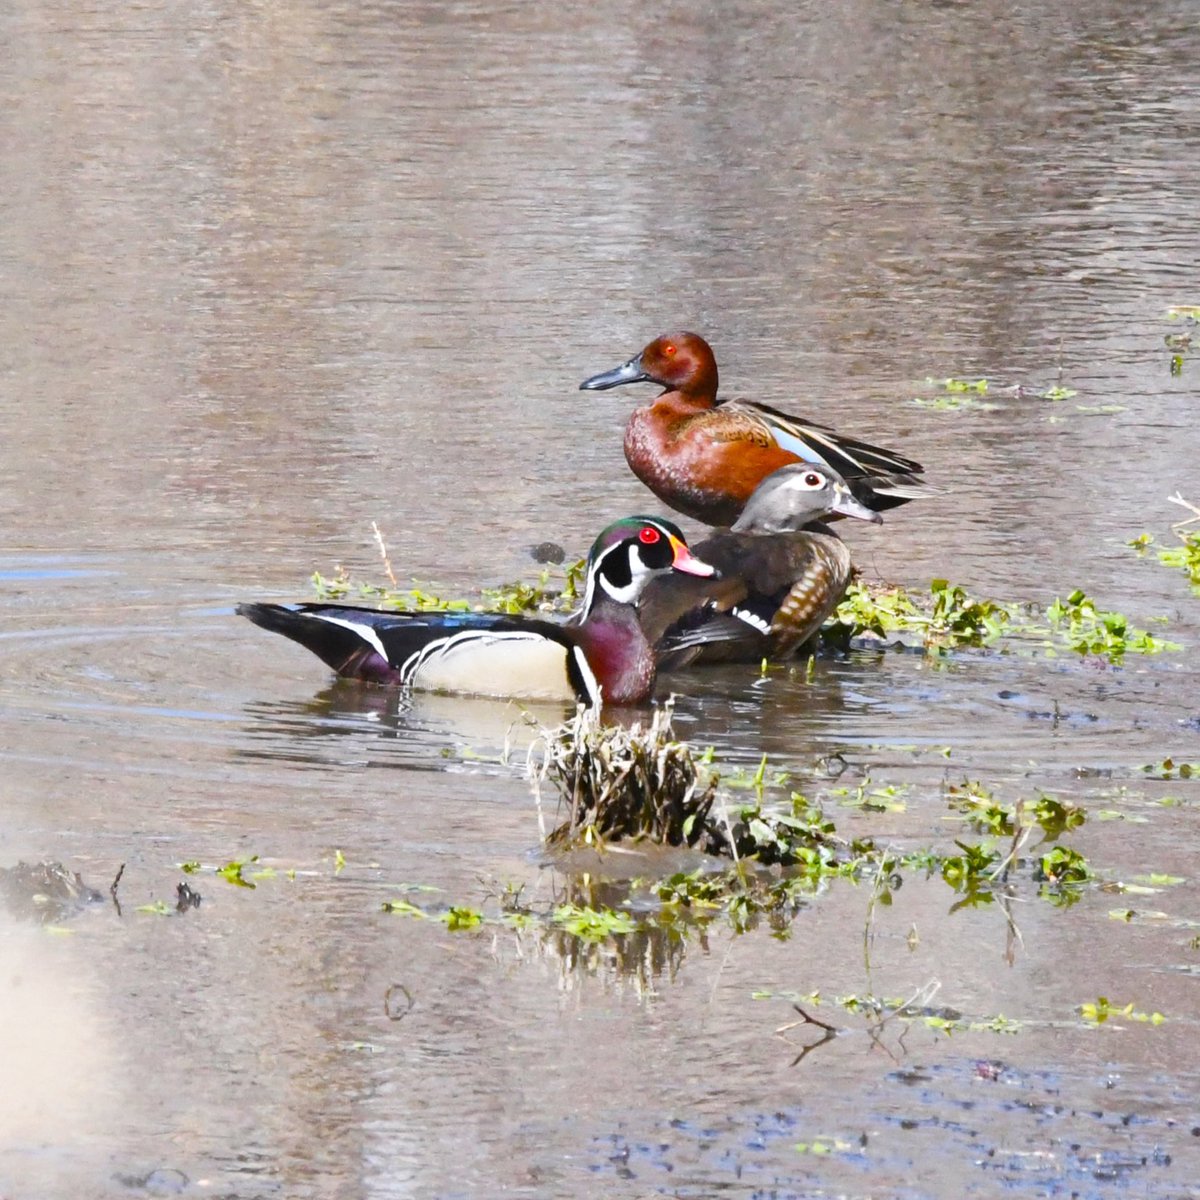 This is still one of my favorite photos. Can’t believe its been two years. Happy Waterfowl Wednesday!!! 

Nikon D500
Sigma 150-600
Jesse Watkins Photography 

#waterfowl #waterfowlphotography #waterfowlwednesday #woodducks #teal #ducksunlimited #birds #birdphotography #nikonusa